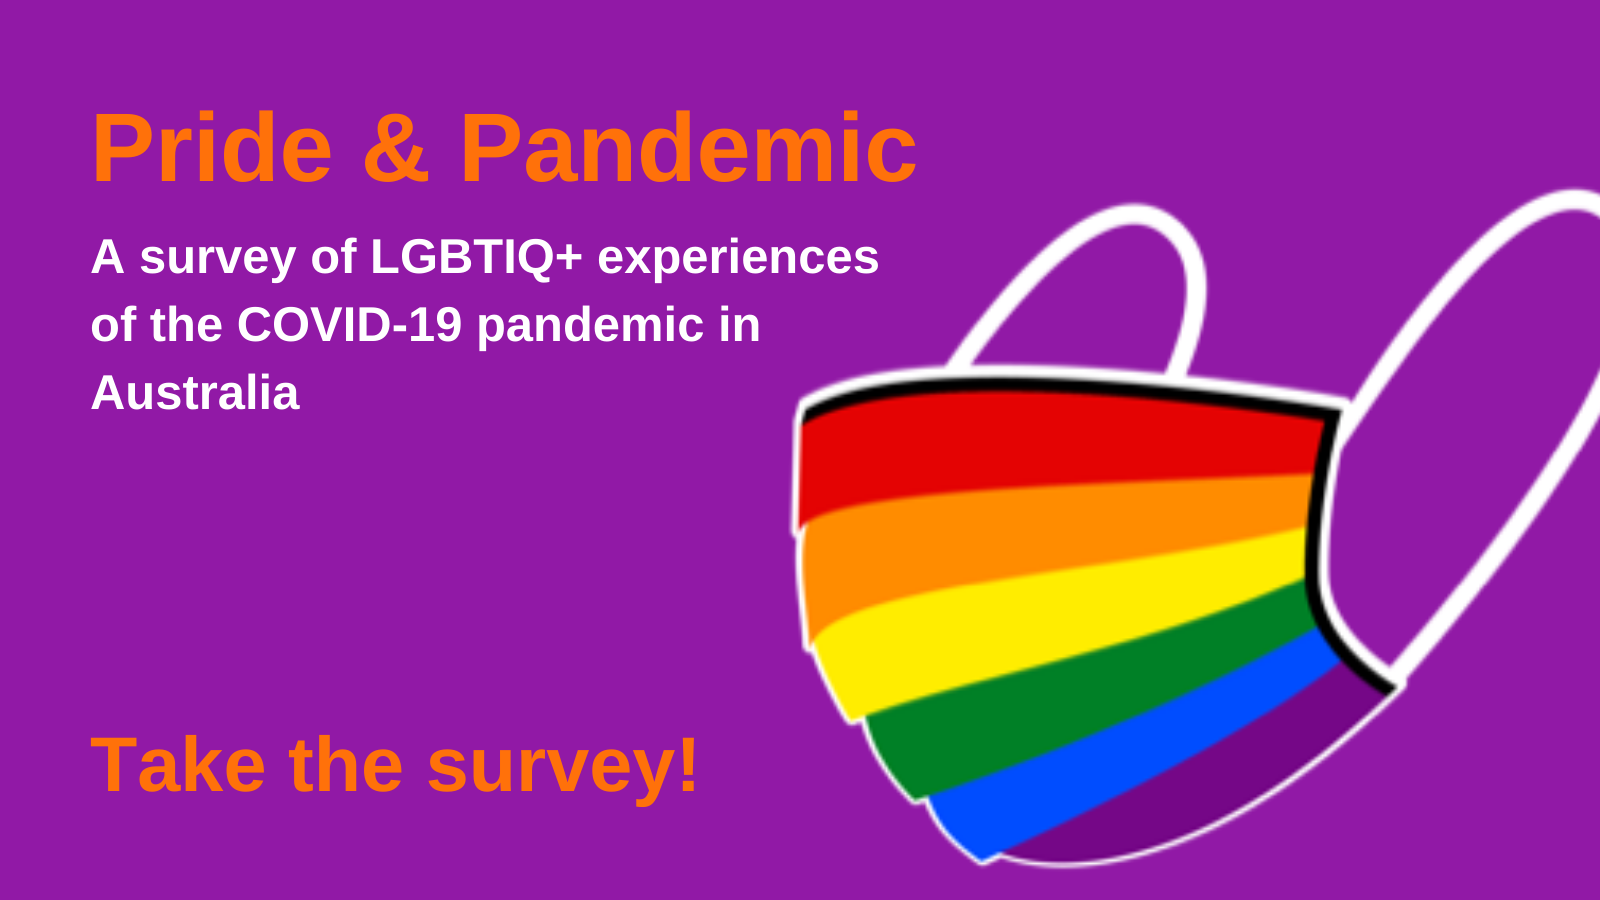 Rainbow mask graphic with text 'Pride & Pandemic - A survey of LGBTIQ+ experiences of the COVID-19 pandemic in Australia - Take the survey!